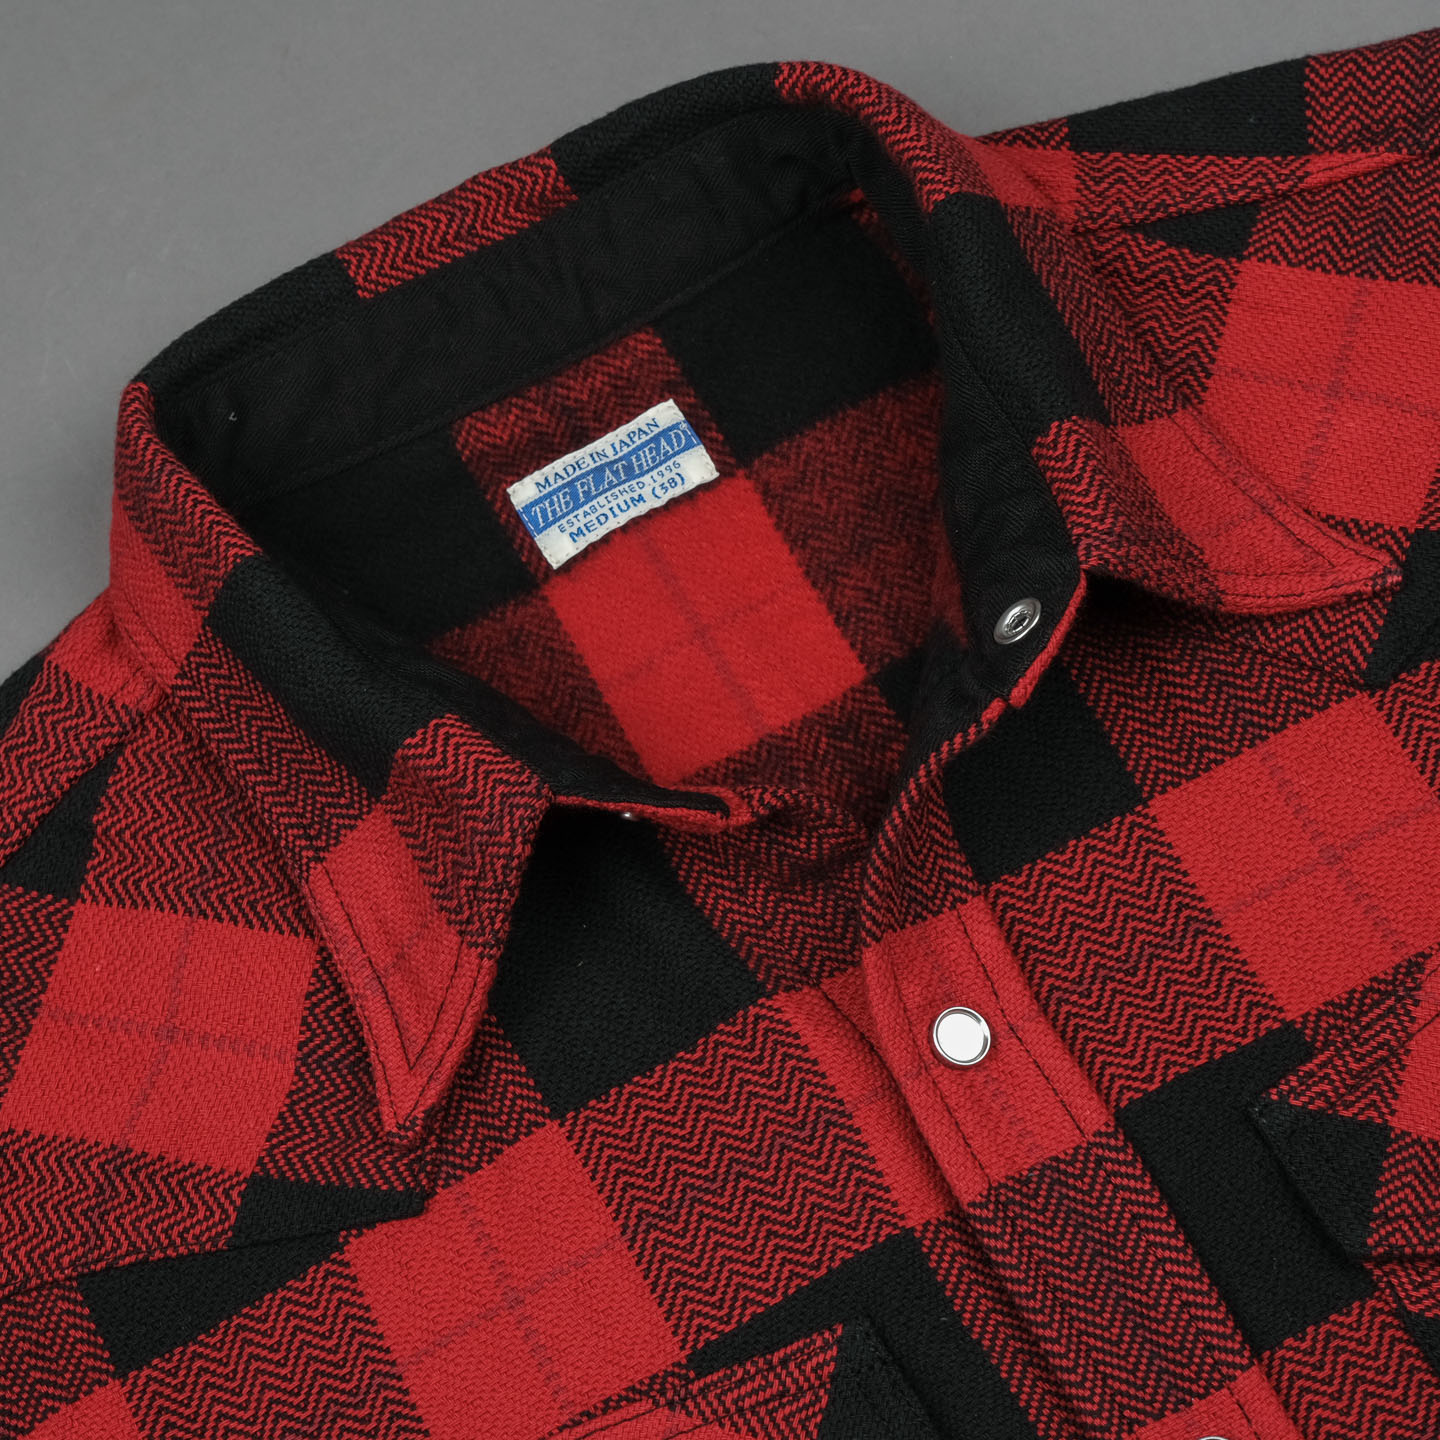 The Flat Head Block Check Western Flannel - Red/Black